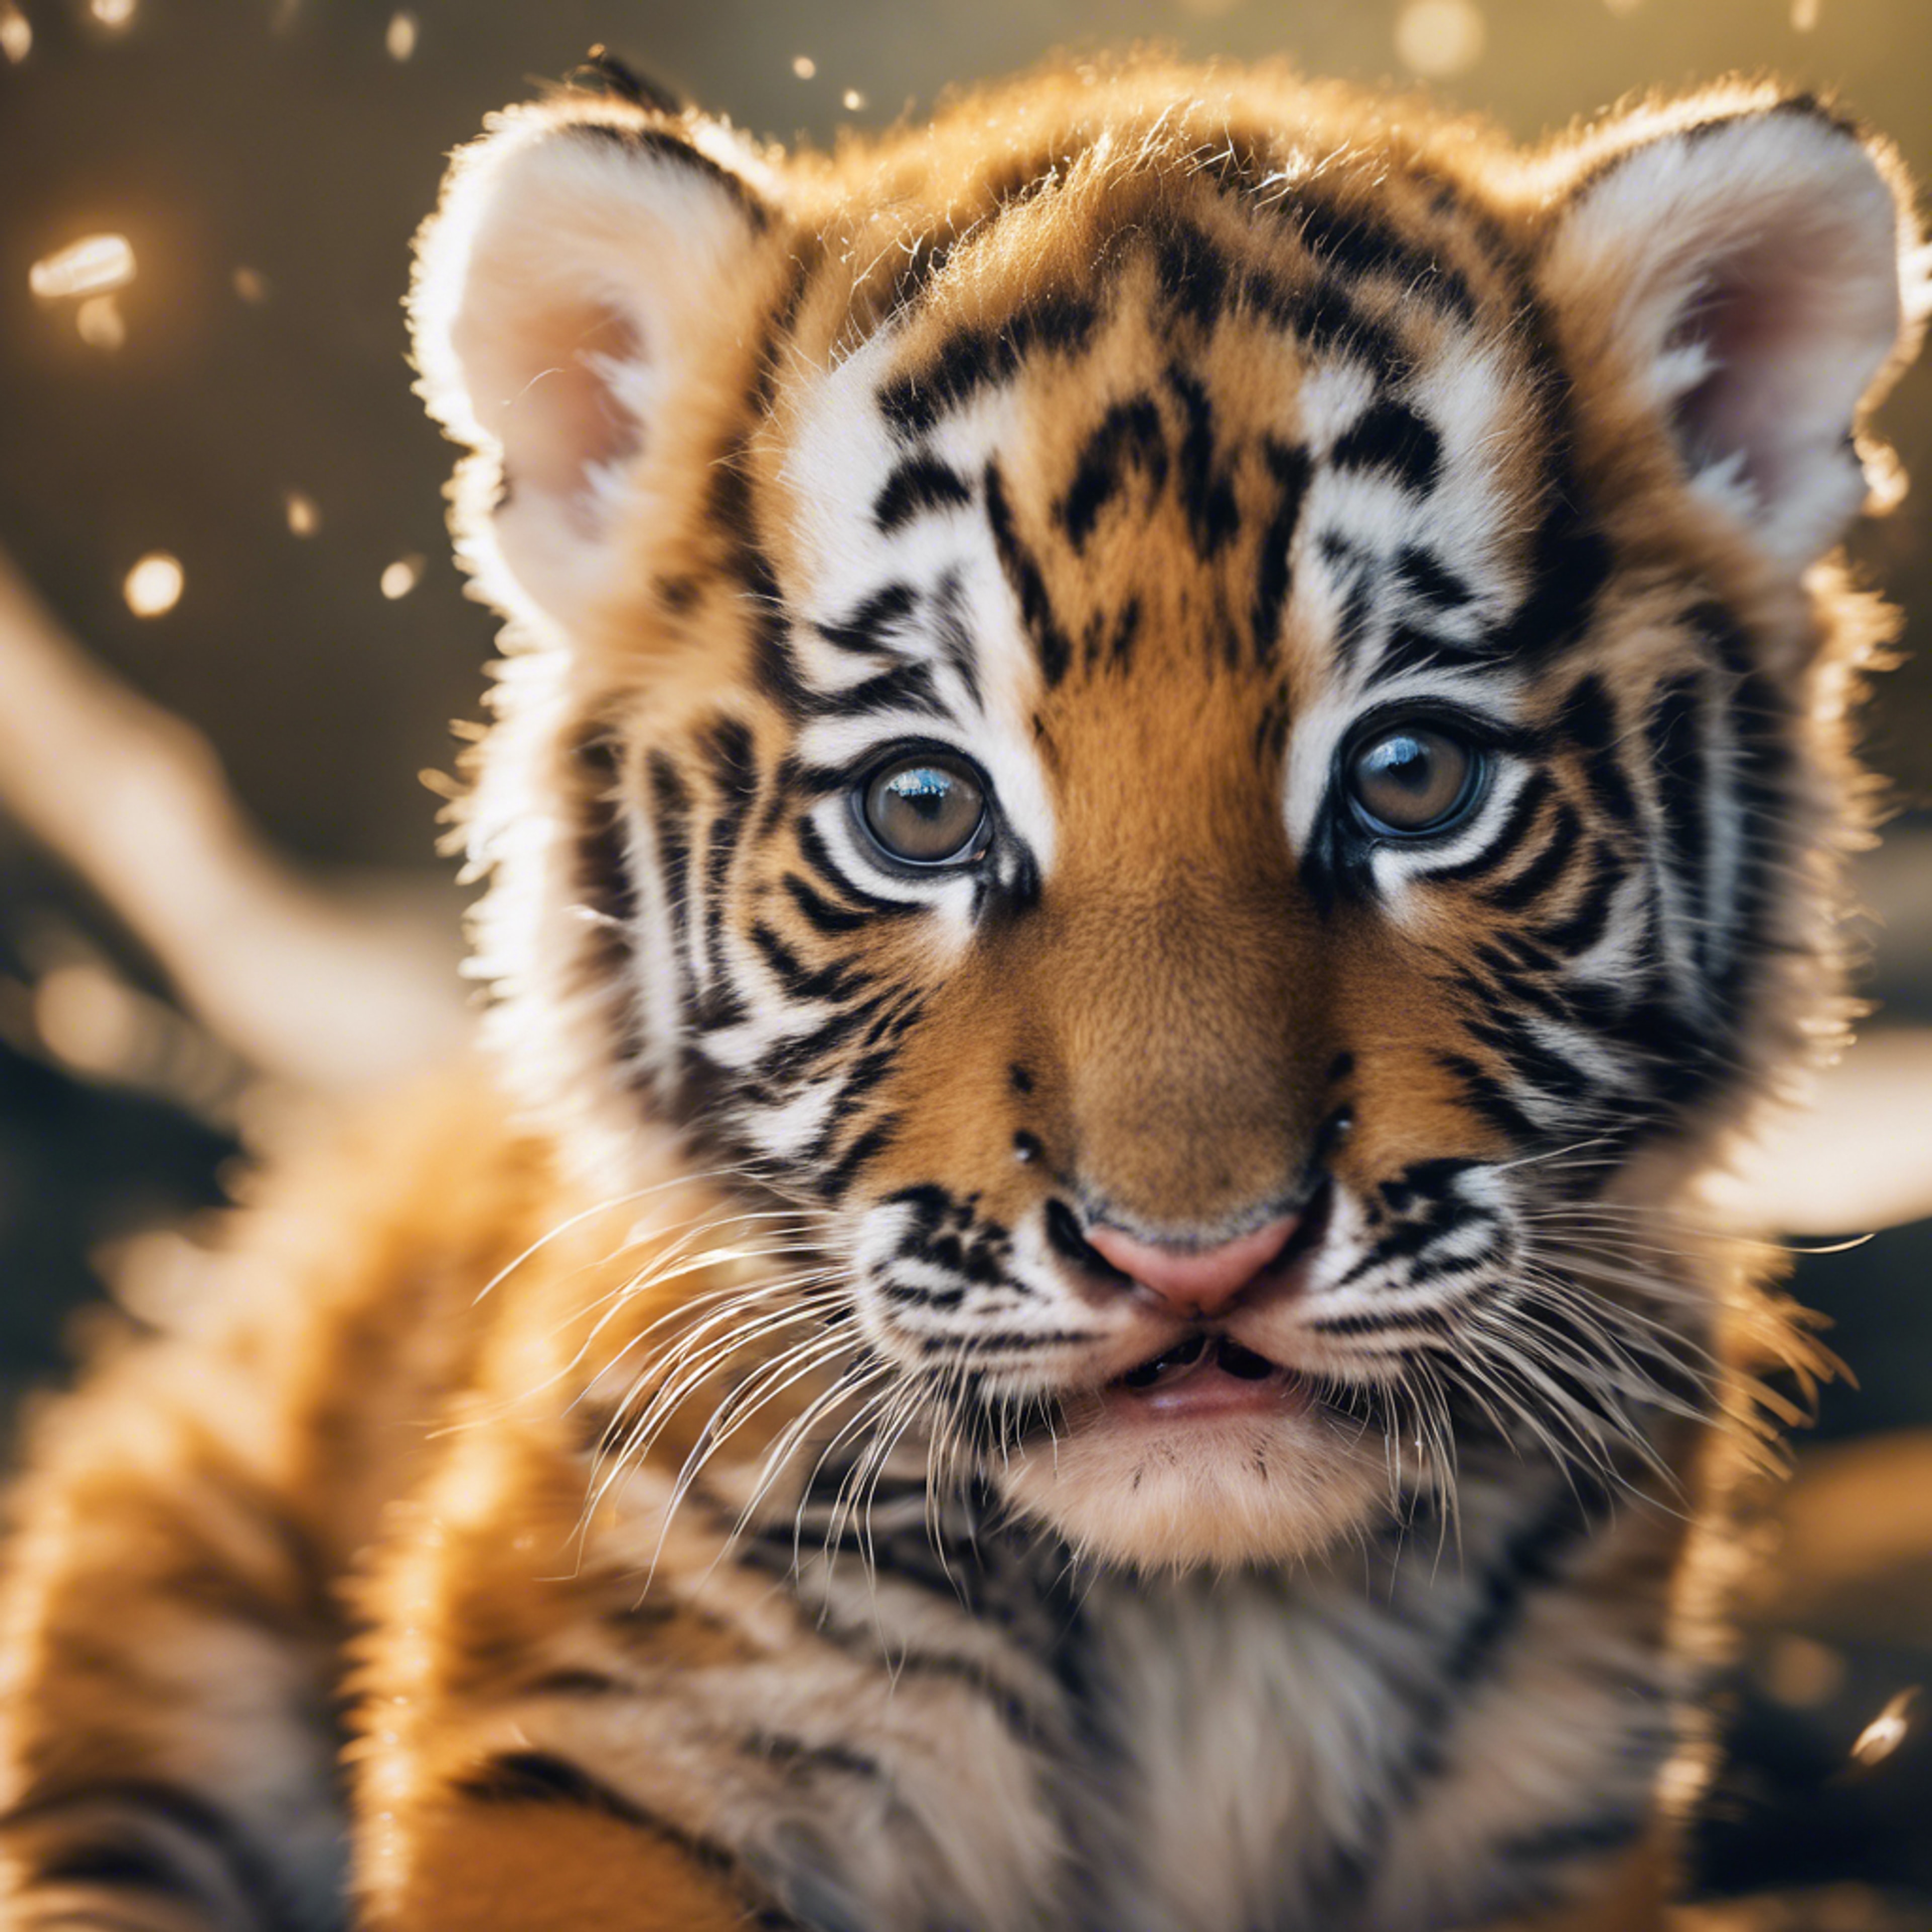 A lively orange tiger cub with large round eyes in a kawaii rendering. Tapeta[41206ae9e13545bea05a]